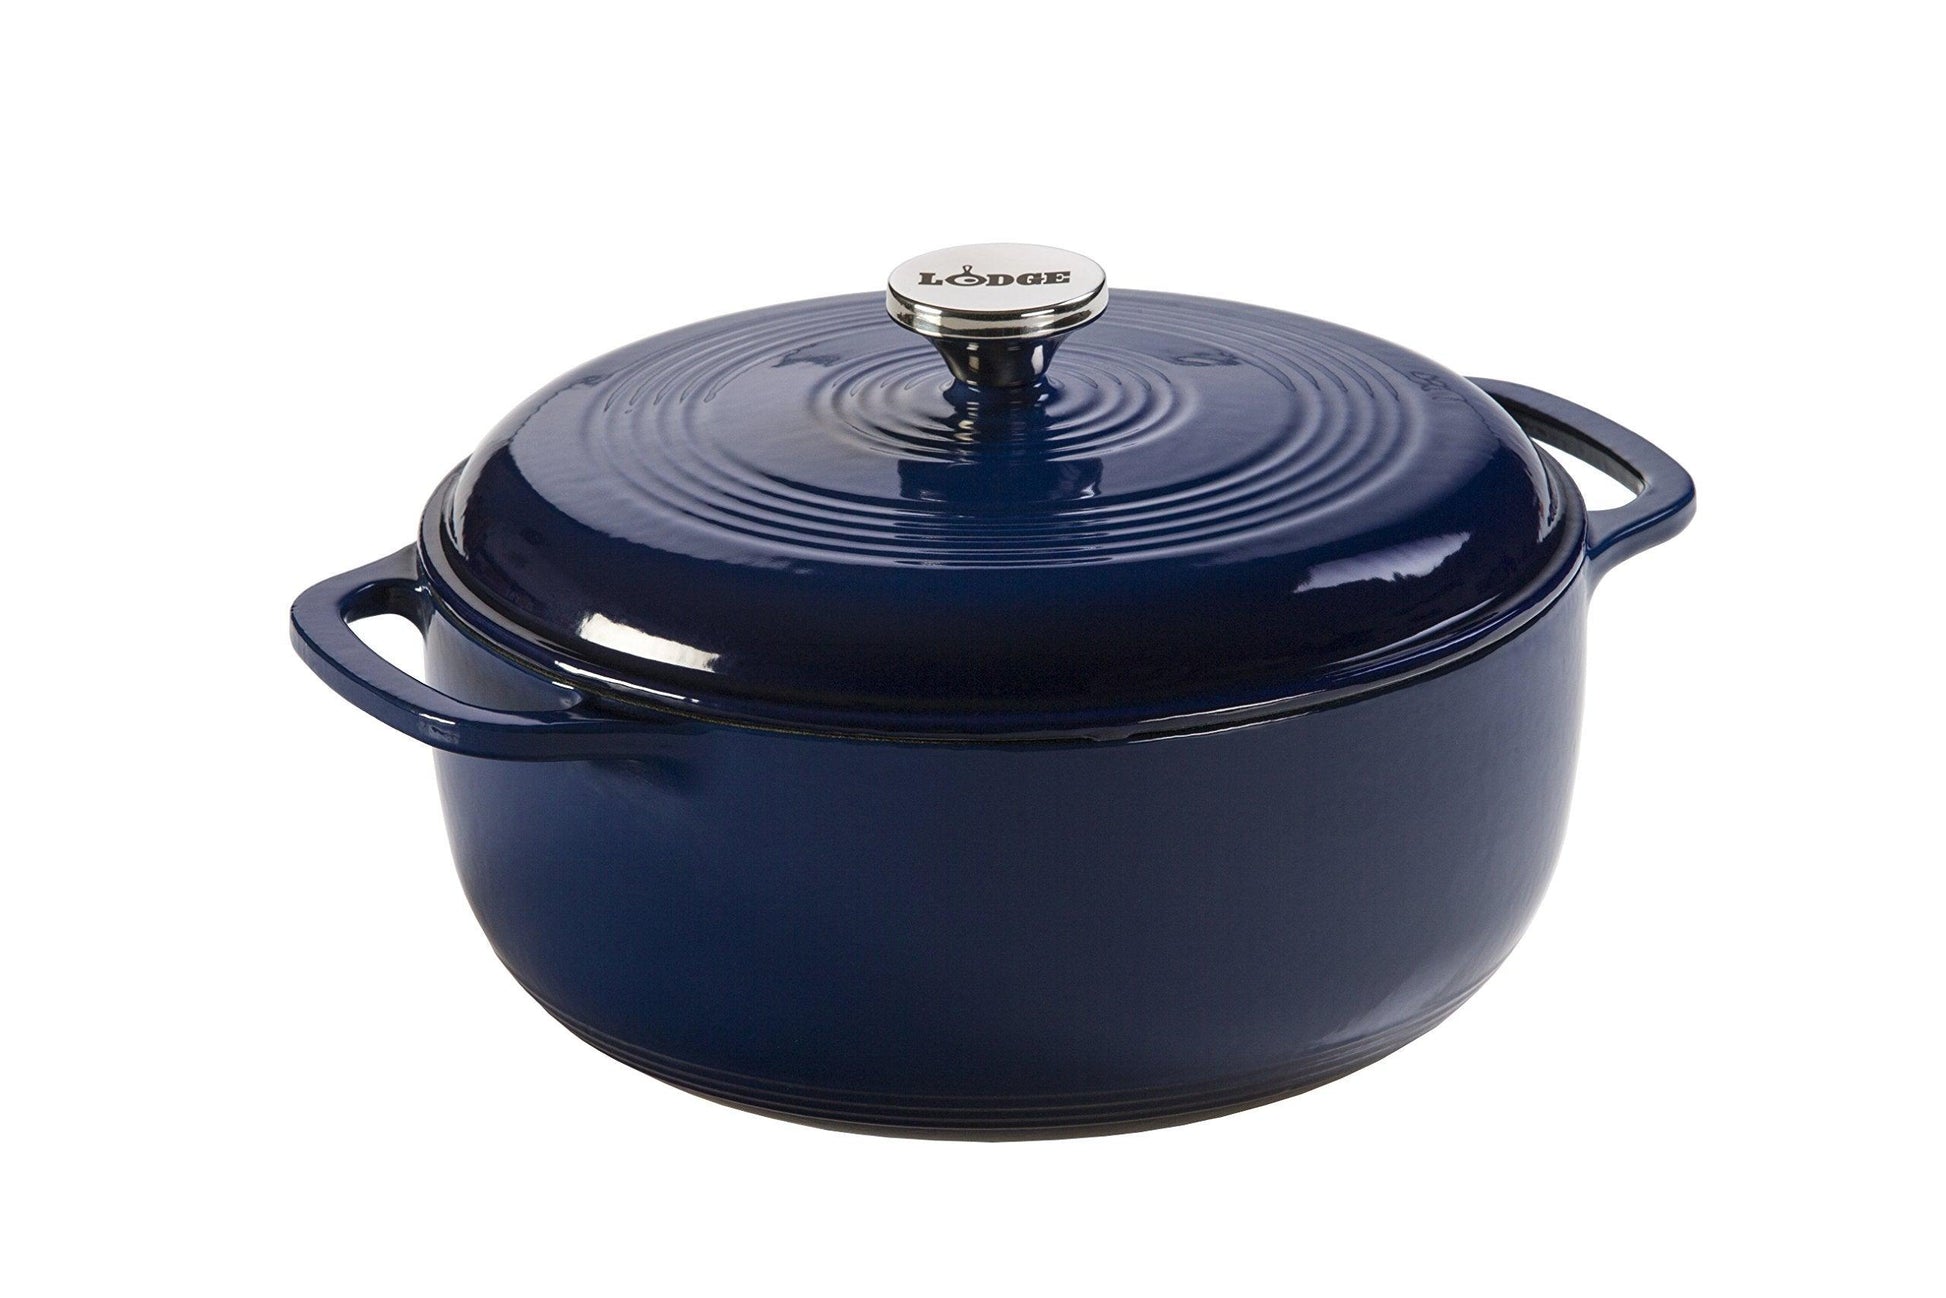 Lodge 6 Quart Enameled Cast Iron Dutch Oven with Lid – Dual Handles – Oven Safe up to 500° F or on Stovetop - Use to Marinate, Cook, Bake, Refrigerate and Serve – Indigo - CookCave